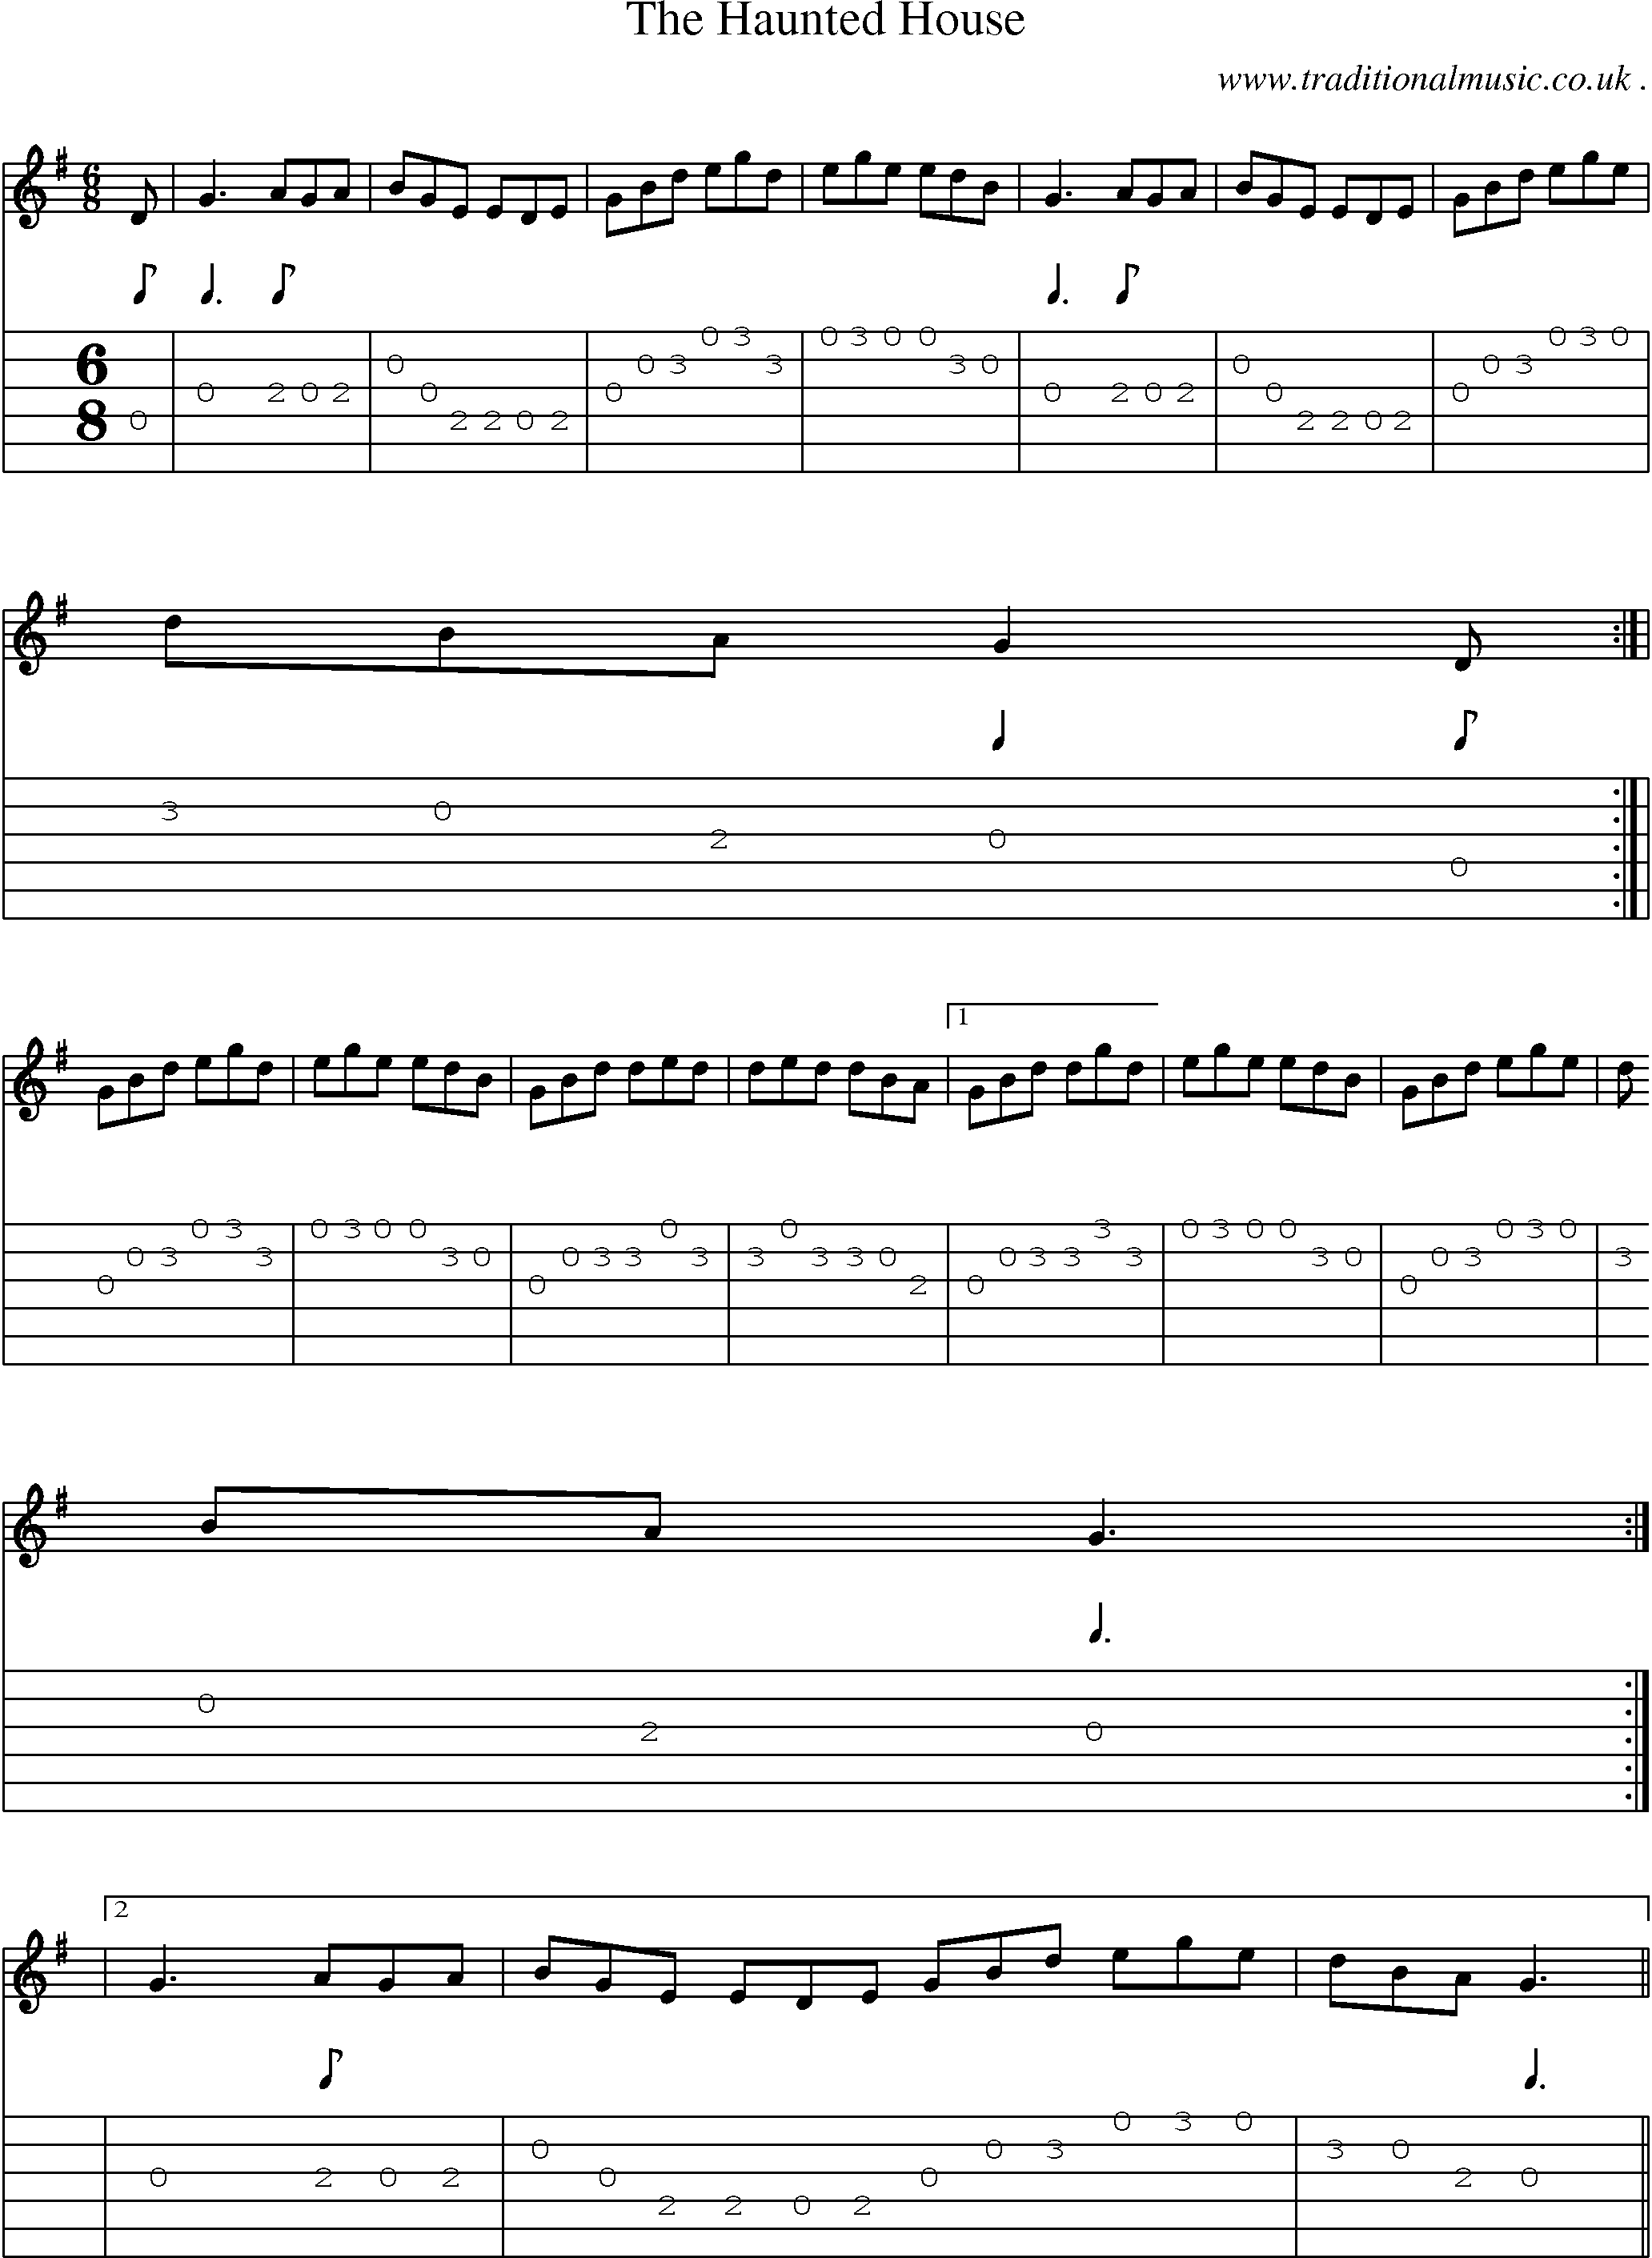 Sheet-Music and Guitar Tabs for The Haunted House